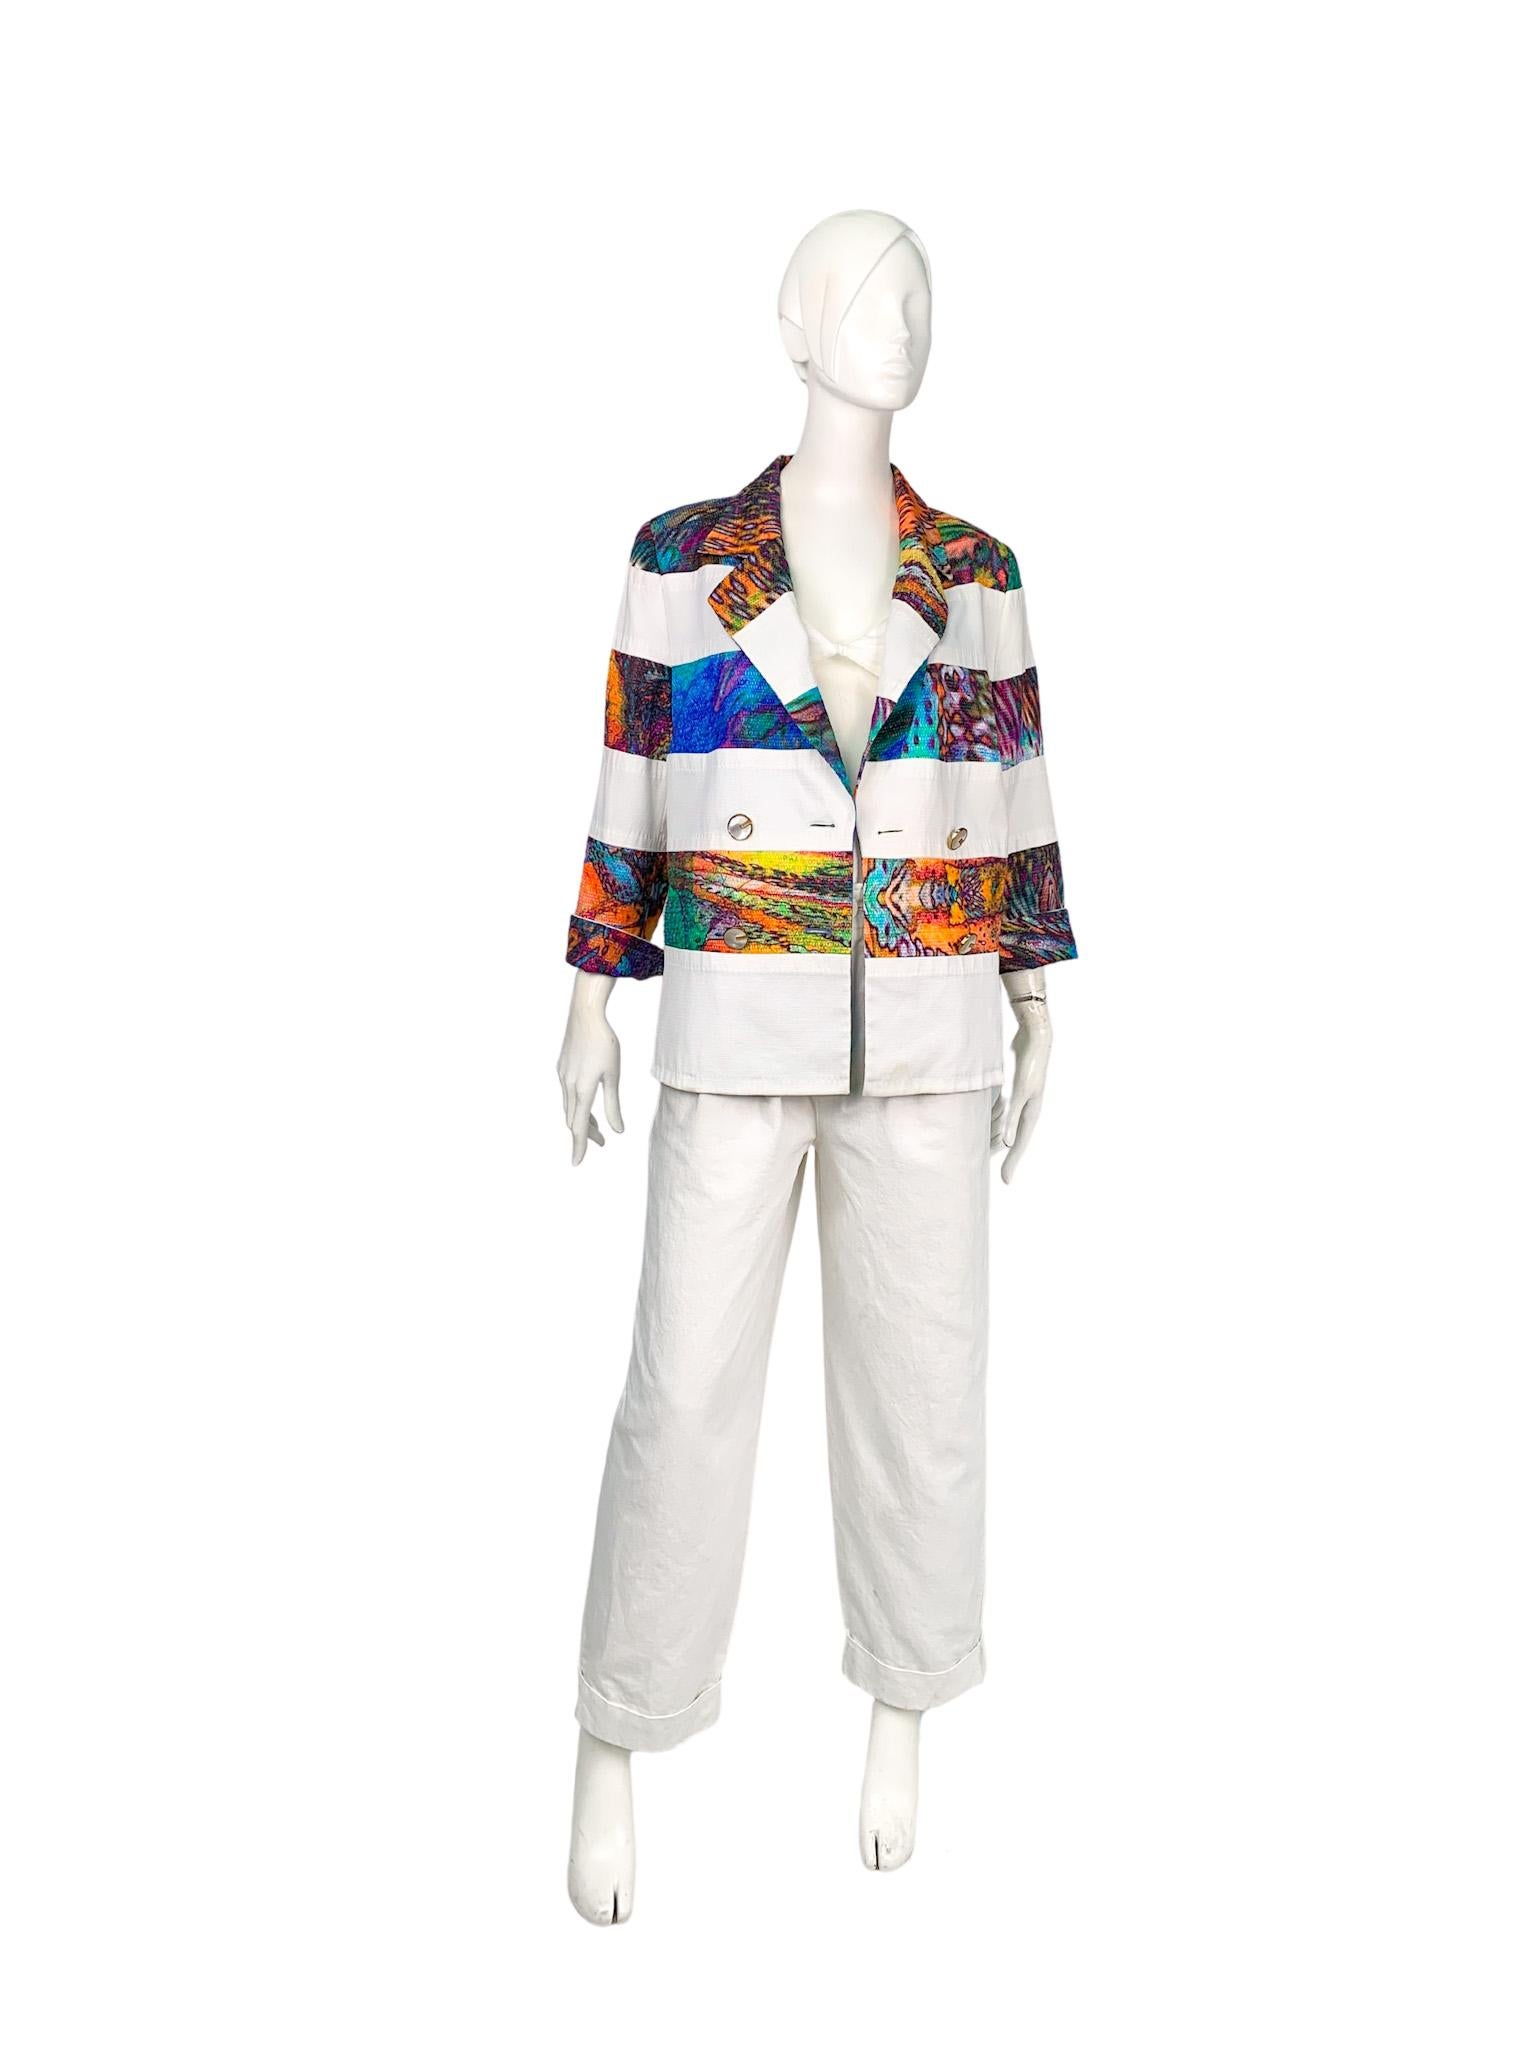 Escada structured double-breasted summer blazer showcasing a refined use of the patchwork technique. It effortlessly combines two contrasting fabrics into a wide stripe pattern: a white piqué fabric serves as a striking backdrop, contrasting